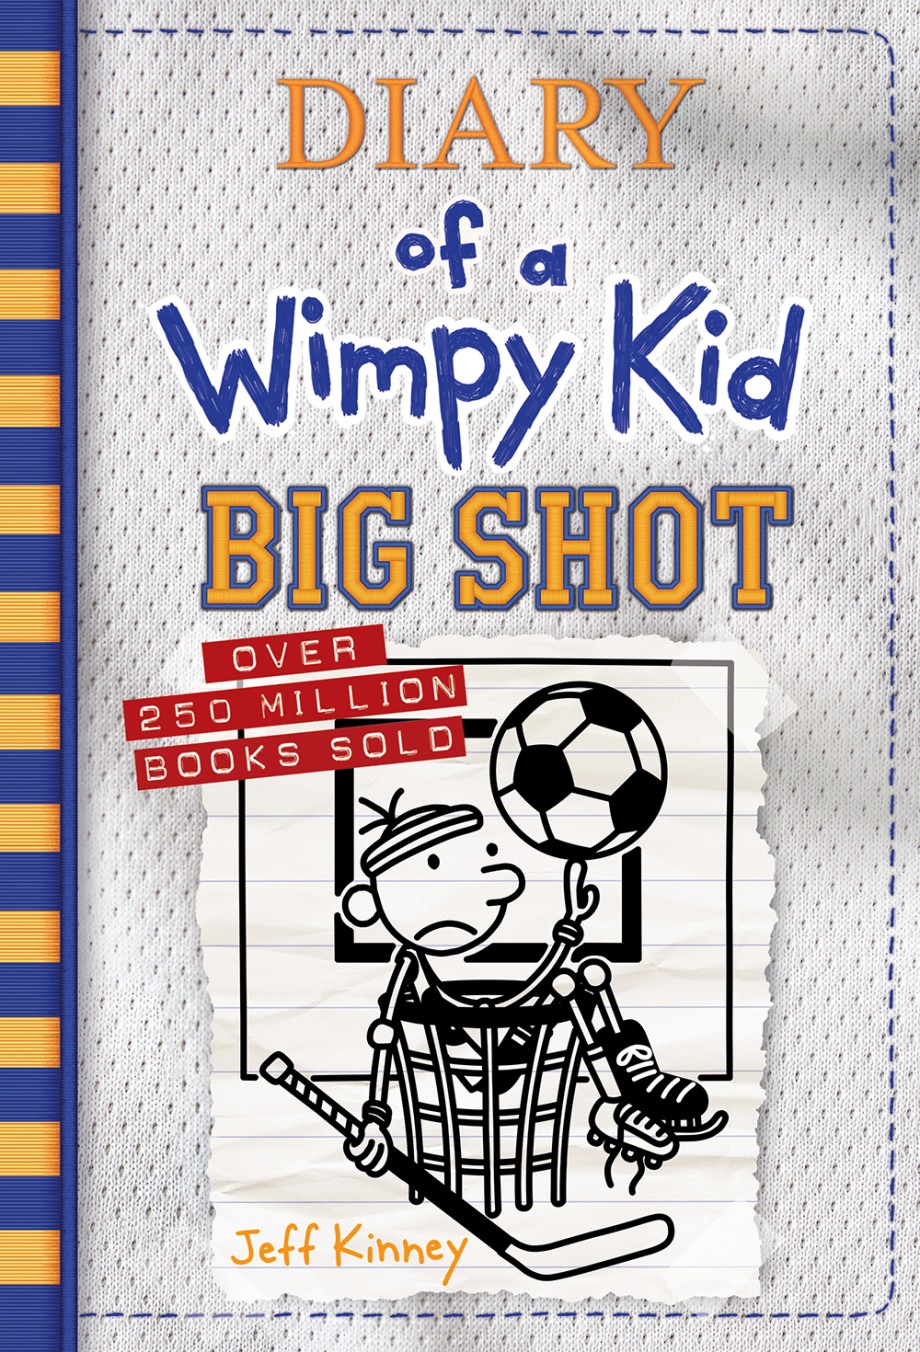 Big Shot (Diary of a Wimpy Kid Book 16) (Hardcover) ABRAMS